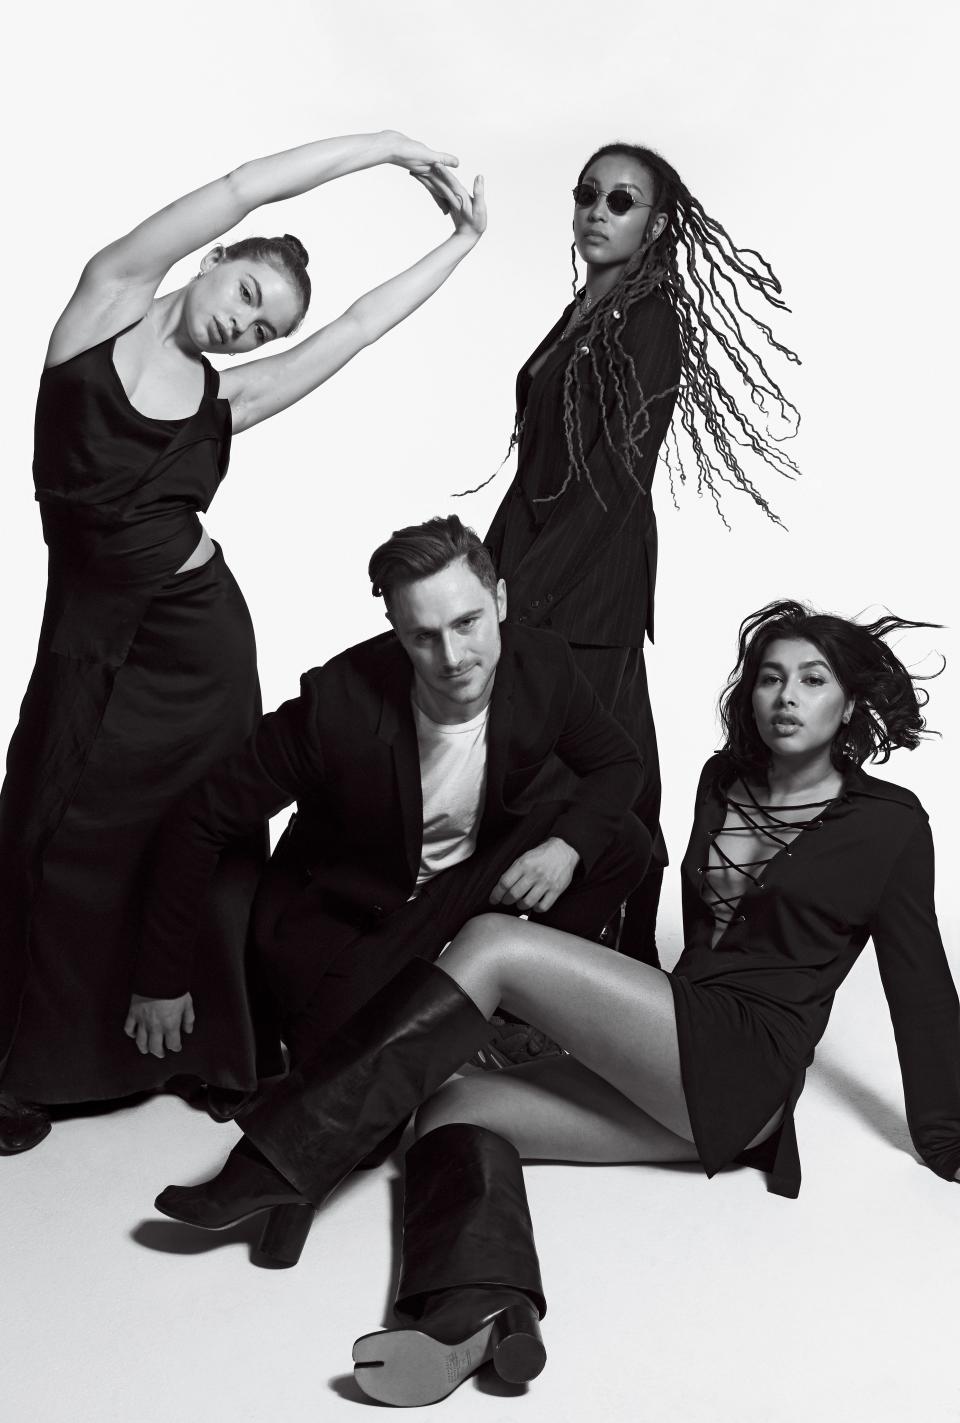 <cite class="credit"><em>From left:</em><br> <strong>On Bella Lucio:</strong> Dress by Ann Demeulemeester<br> <strong>On David Casavant:</strong> Vintage suit, by Dior Homme (autumn-winter 2012) / Vintage t-shirt, by Helmut Lang<br> <strong>On Jada-Renee B:</strong> Vintage suit, by Raf Simons / Vintage boots, by Calvin Klein (autumn-winter 2014) / Sunglasses, $175, by Sun Buddies<br> <strong>On Imaan Sayed:</strong> Dress, by Gucci by Tom Ford (spring-summer 1996) / Vintage boots, by Maison Margiela<br> <em>All clothing from David Casavant Archive</em></cite>